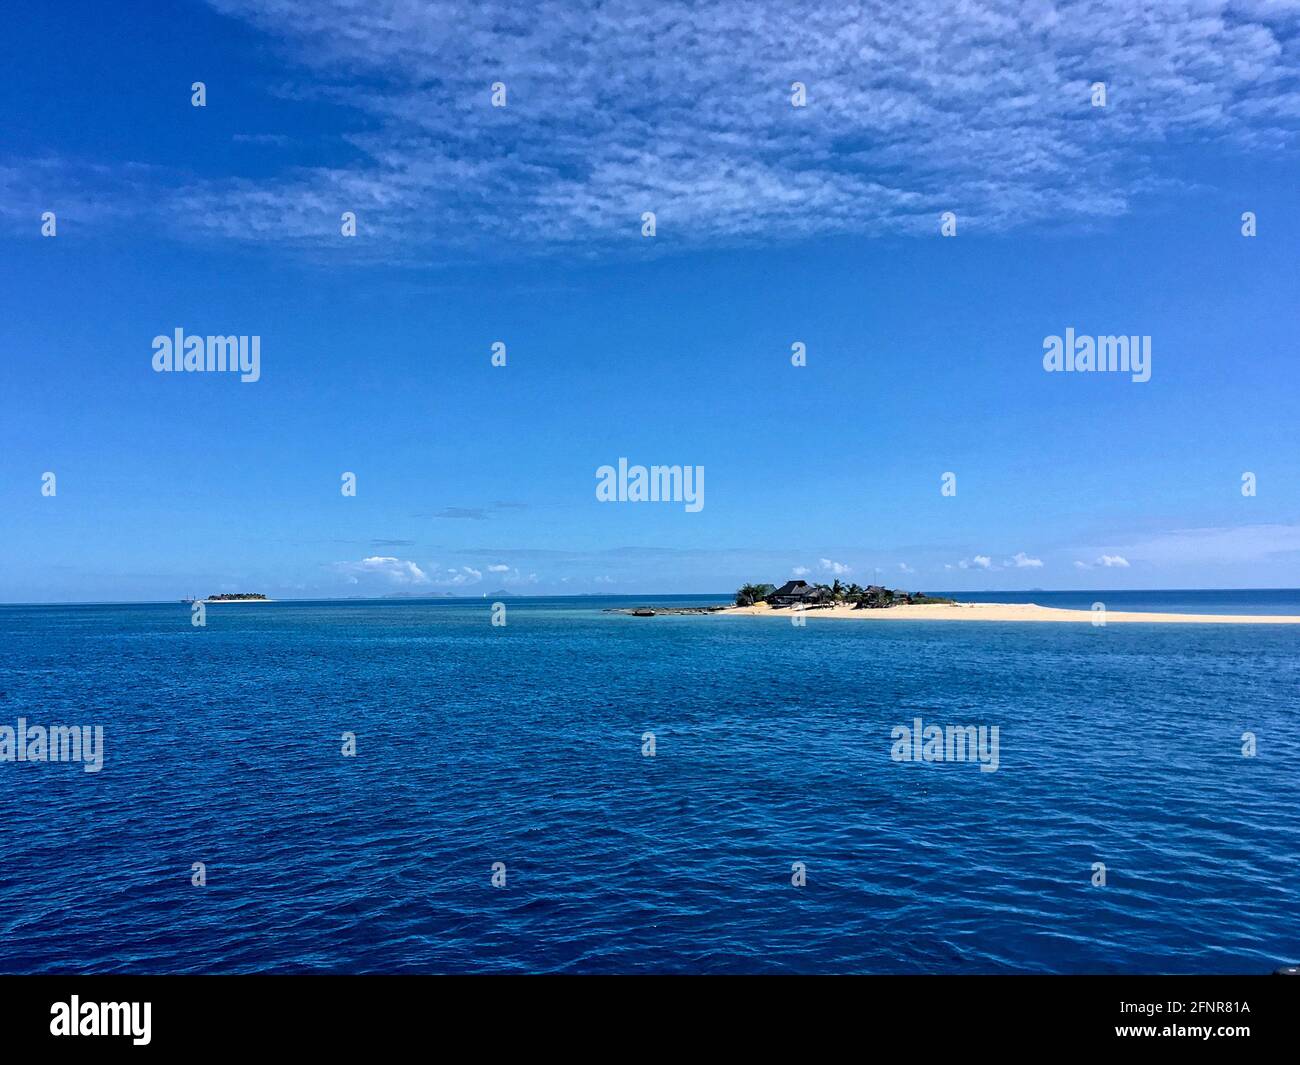 Small Fijian Island Covered In White Sand Surrounded By Ocean Stock Photo